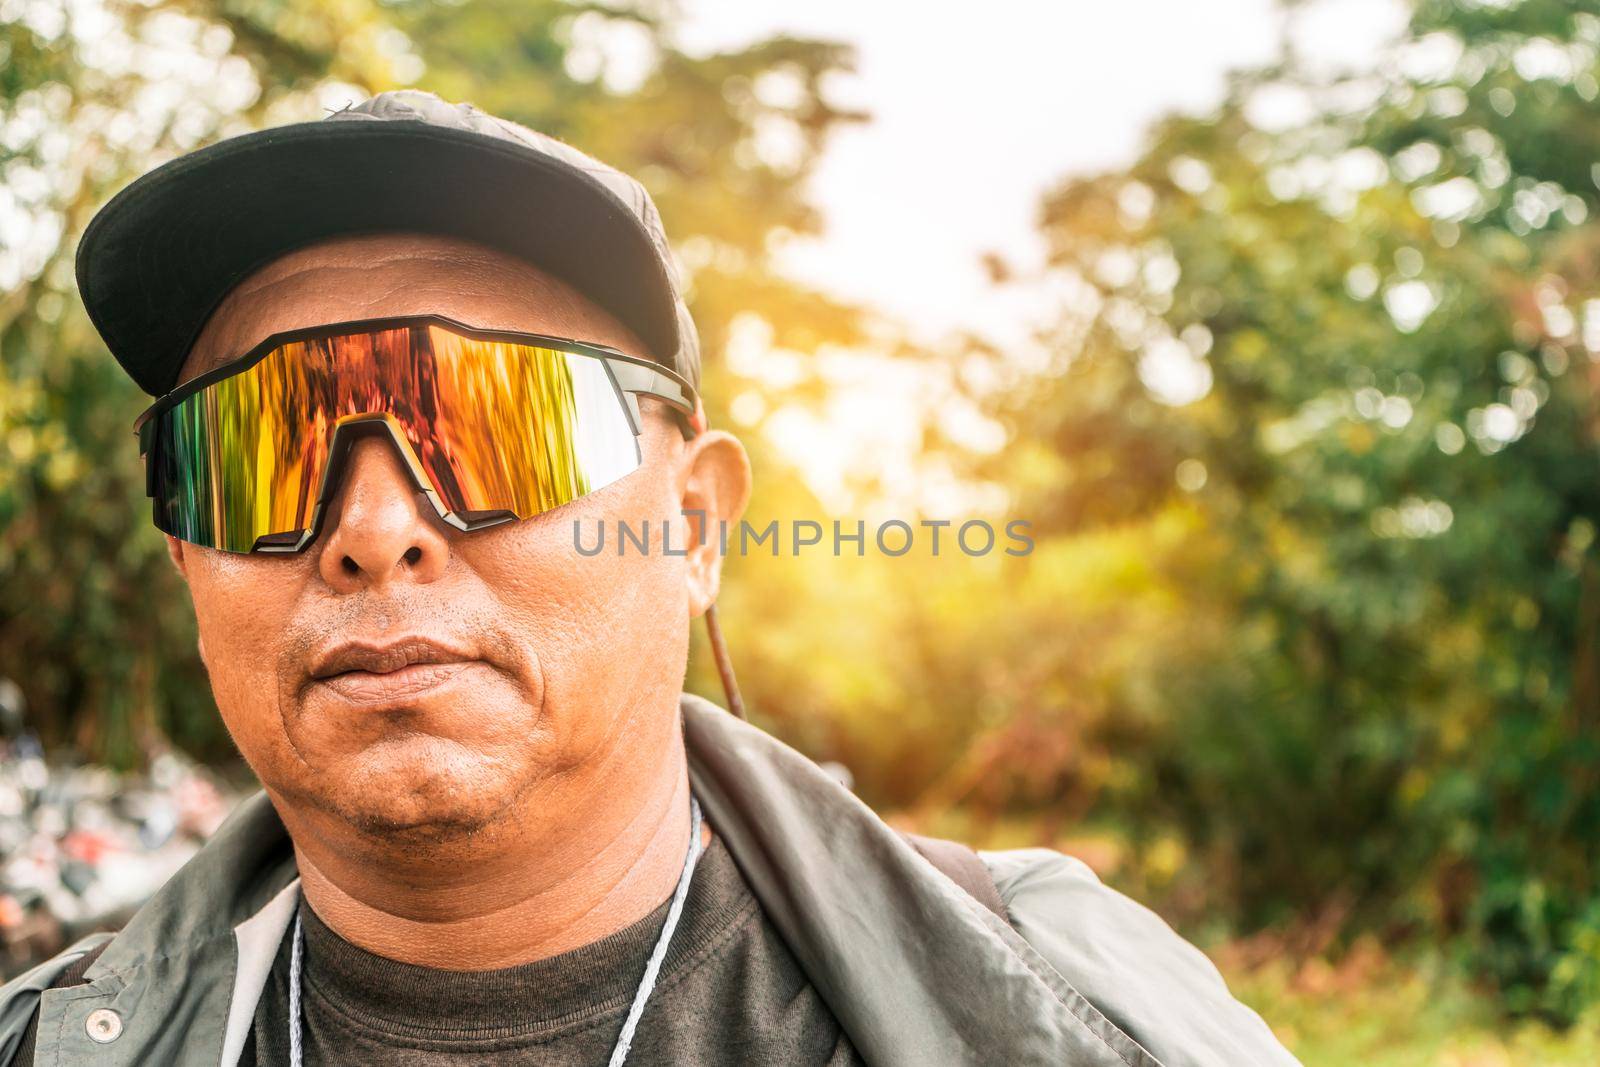 Closeup of an Indigenous man from the Miskito community in Nicaragua with glasses by cfalvarez